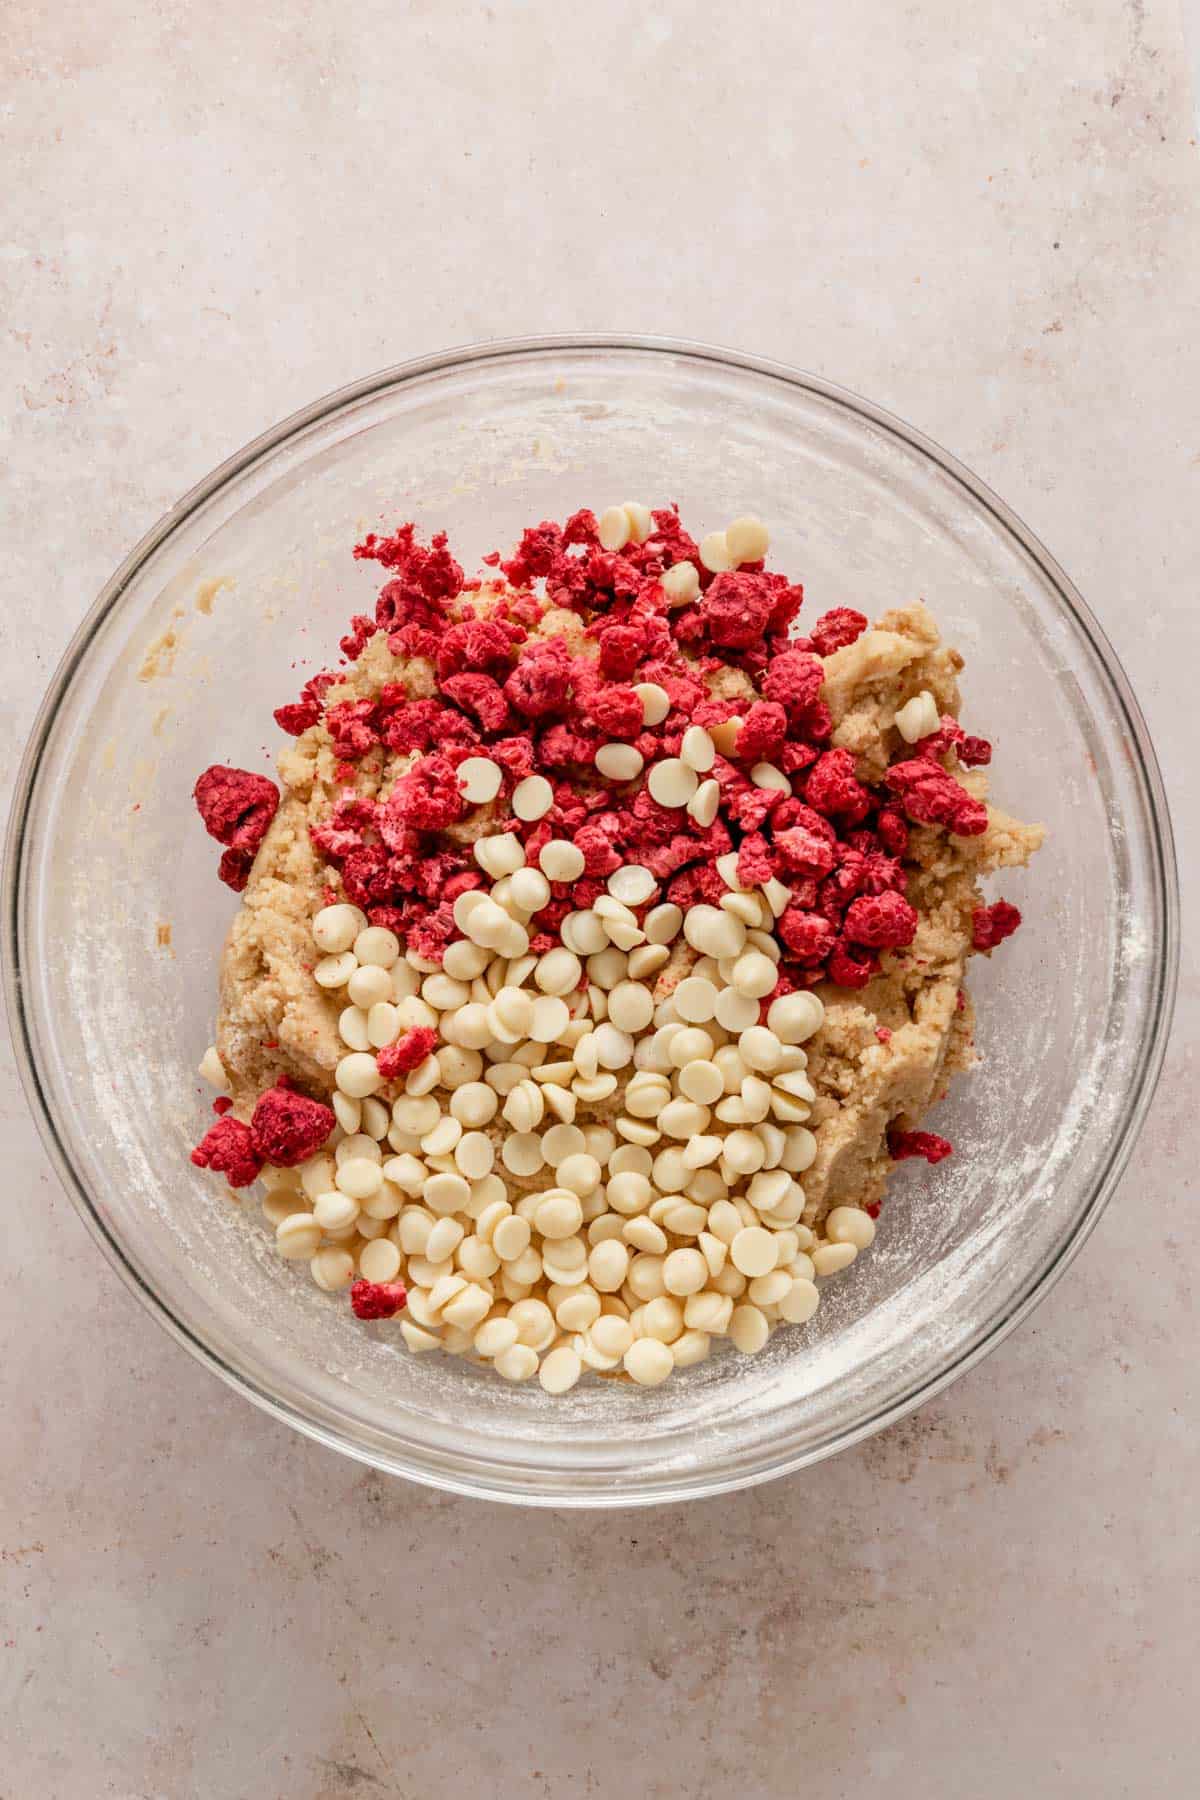 raspberries and white chocolate chips added to cookie batter